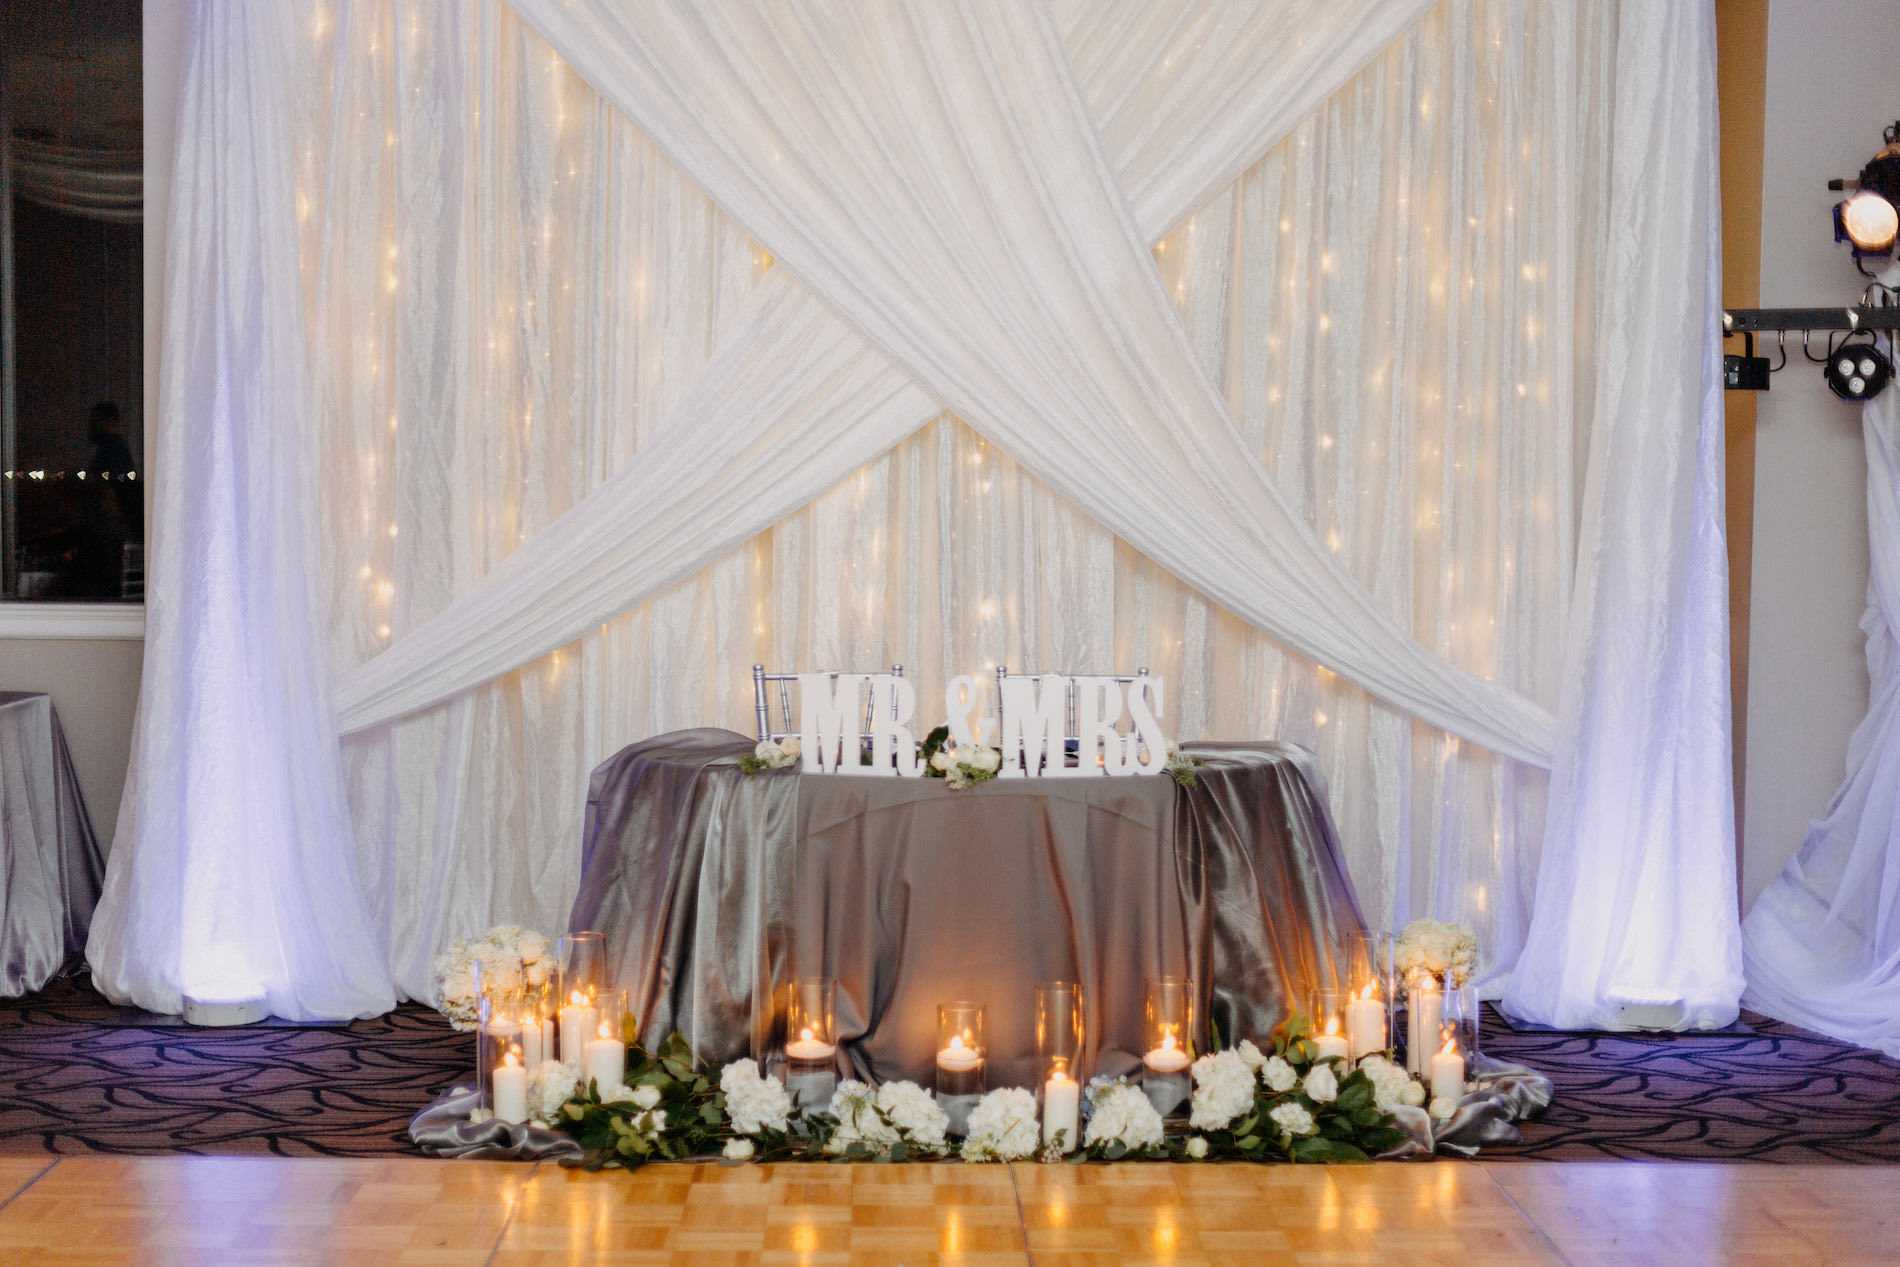 Classic Elegant Wedding Reception Decor, White Draping Backdrop with String Lights, Silver Linen on Sweetheart Table with Mr and Mrs Sign, White Hydrangeas, Glass Cylinder Candles | Tampa Bay Wedding Venue Centre Club